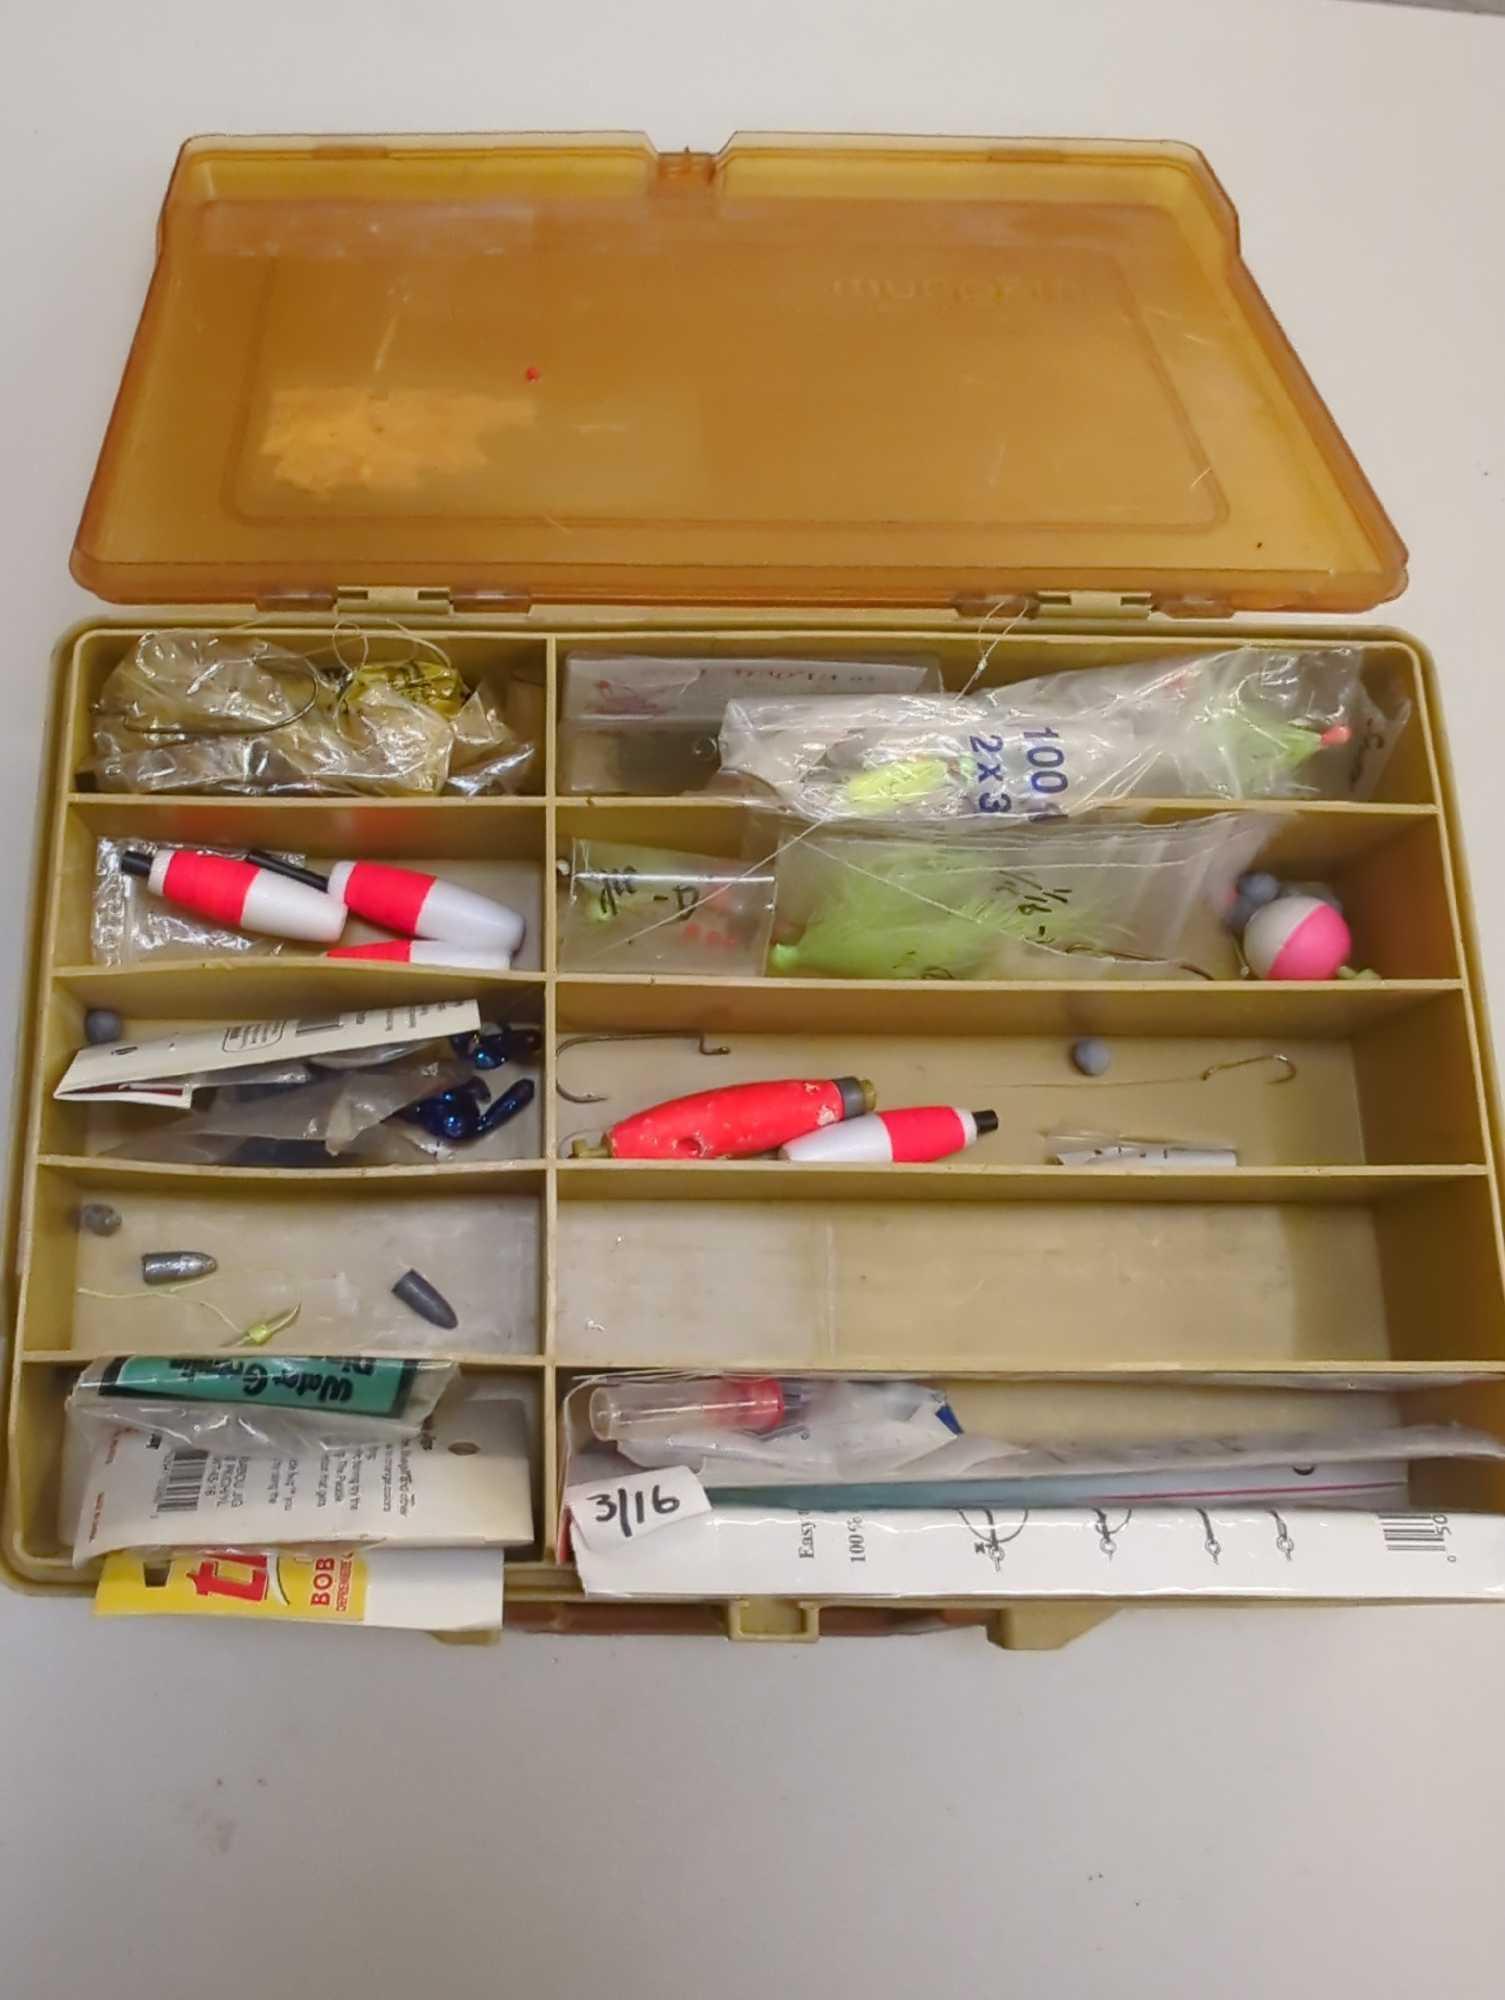 Dual-sided Tackle Box and contents including various fishing lures and other fishing accessories.